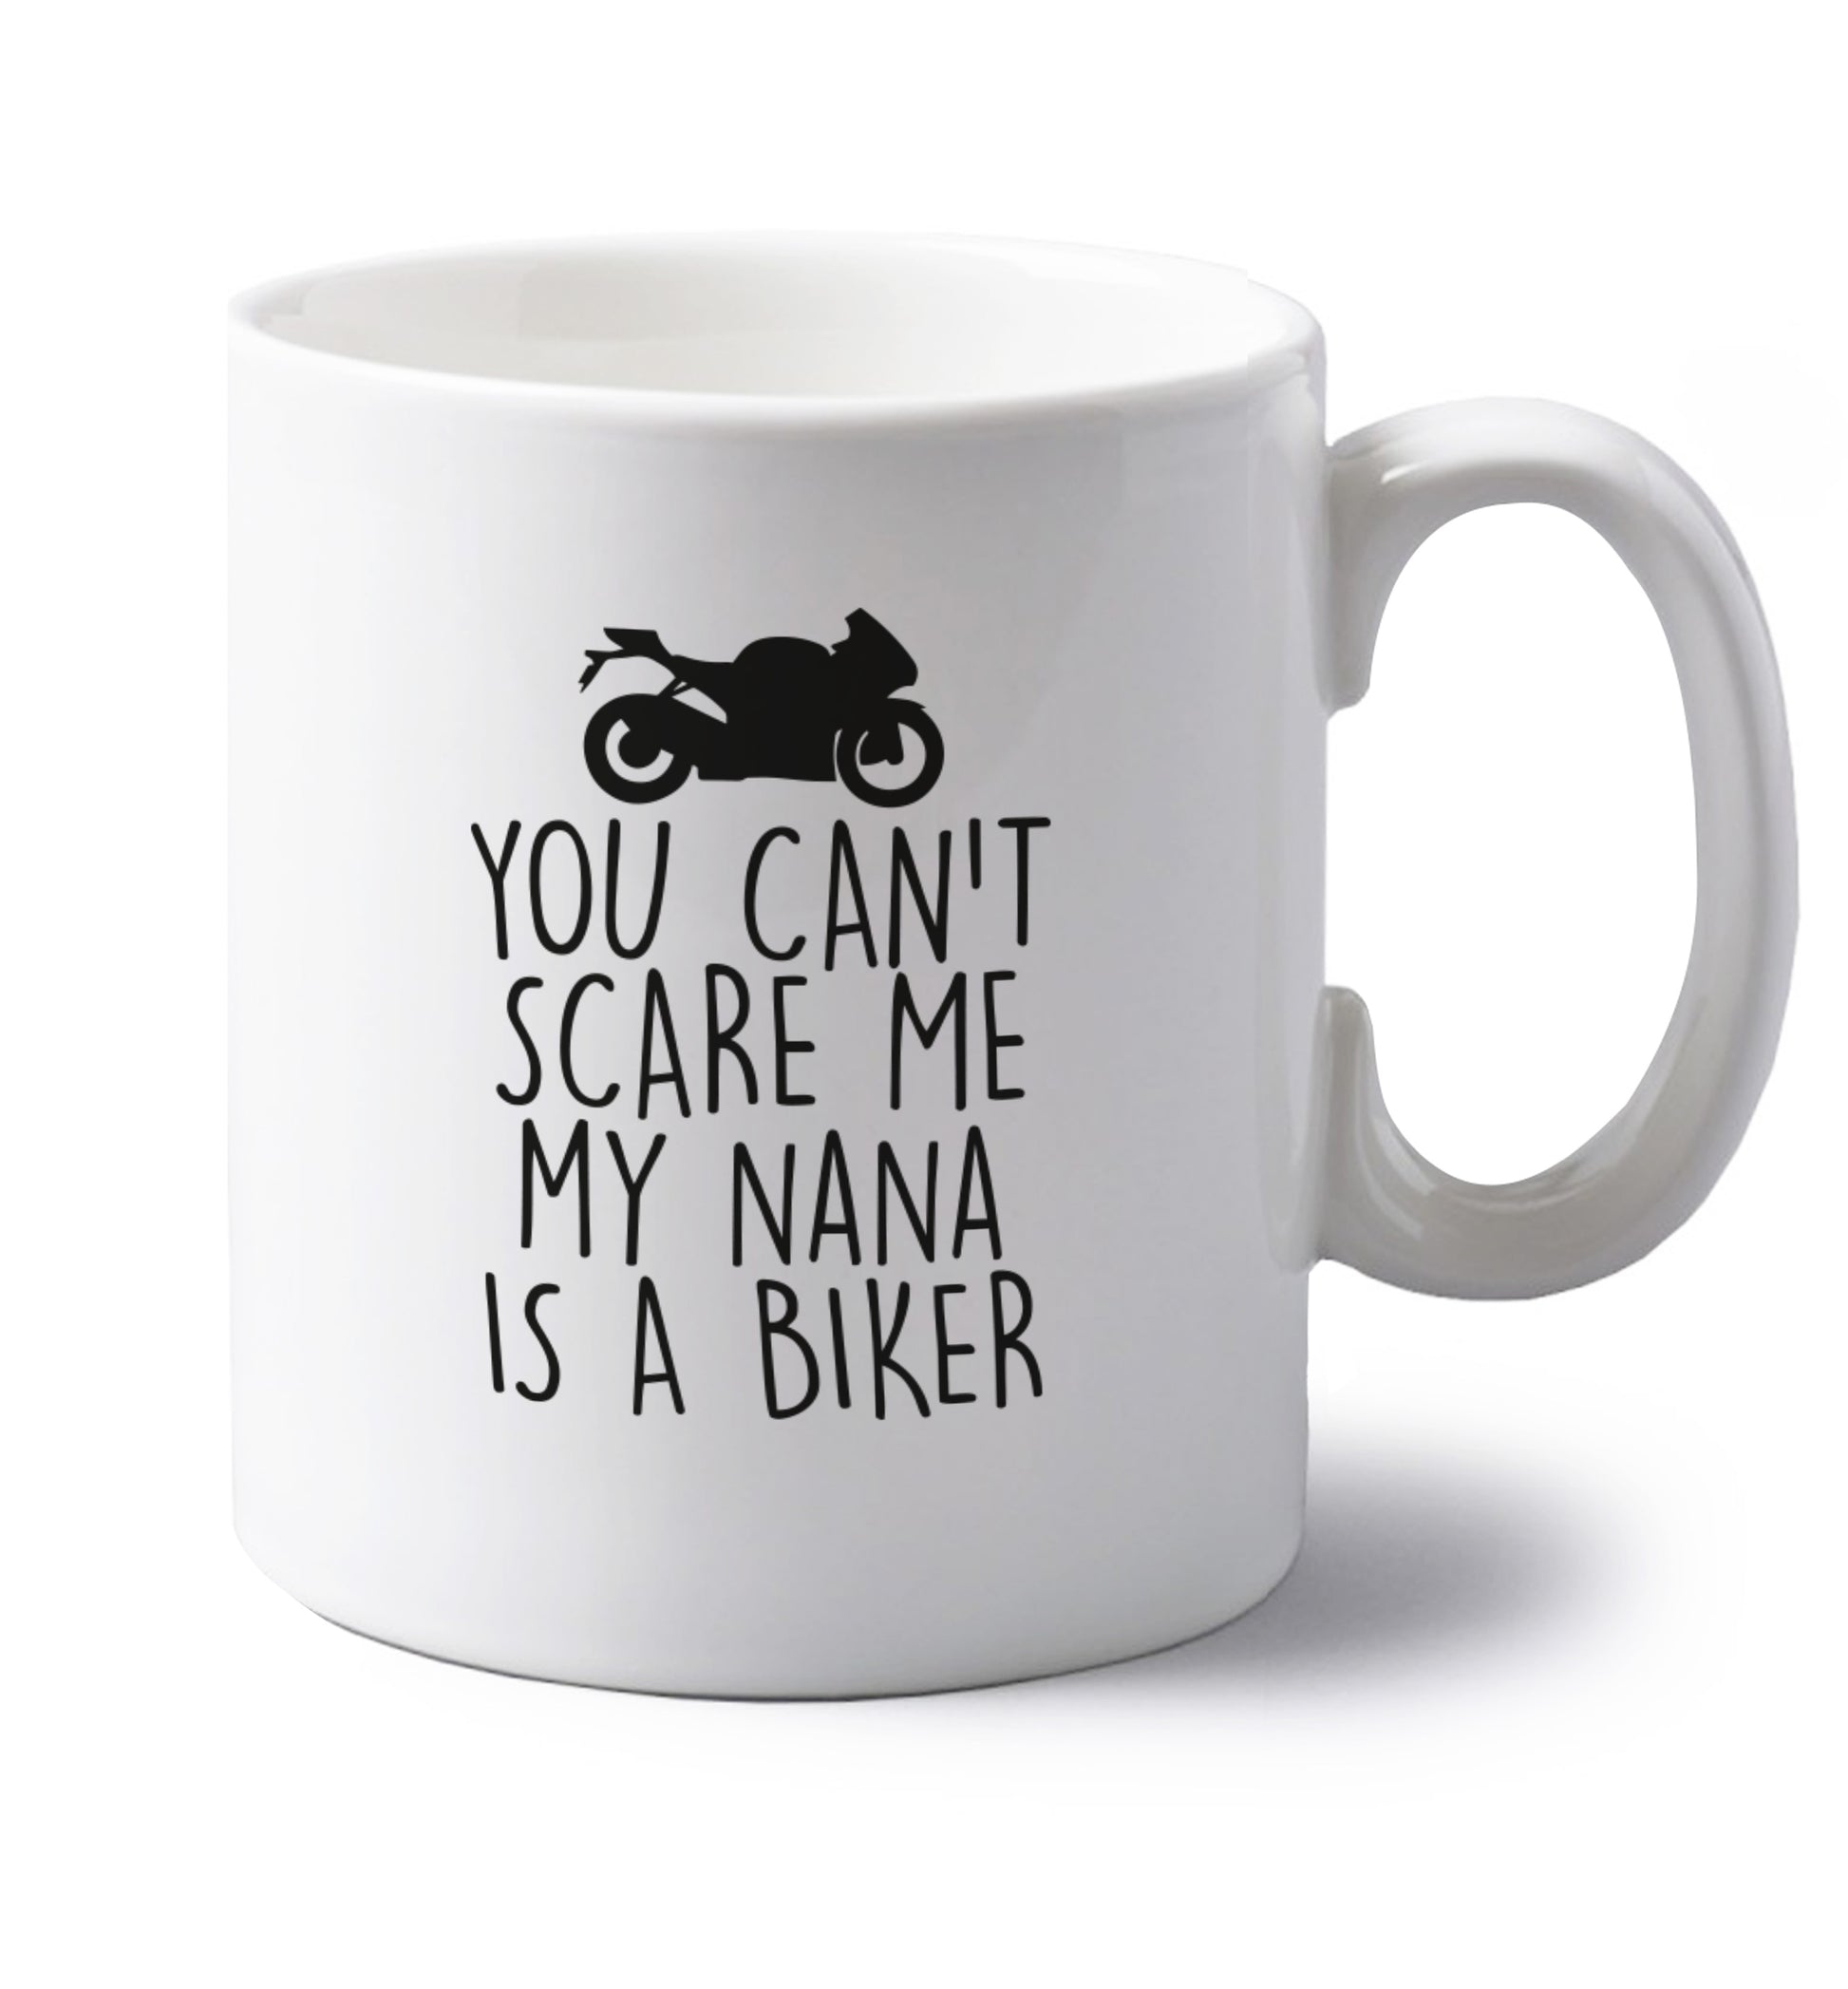 You can't scare me my nana is a biker left handed white ceramic mug 